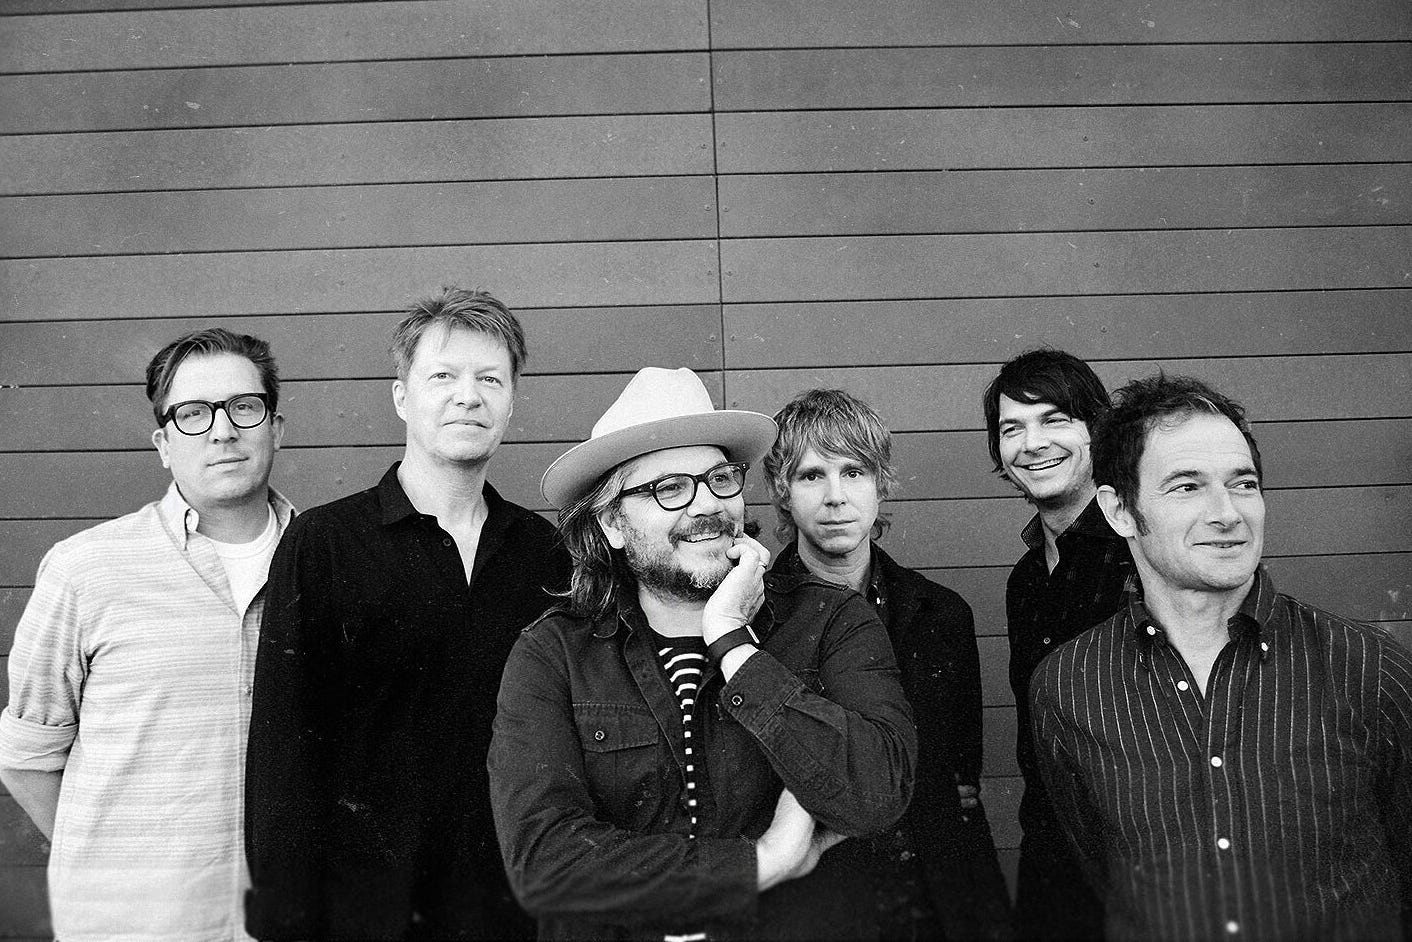 Wilco's 'Love is Everywhere (Beware)' is a Song You Need to Know